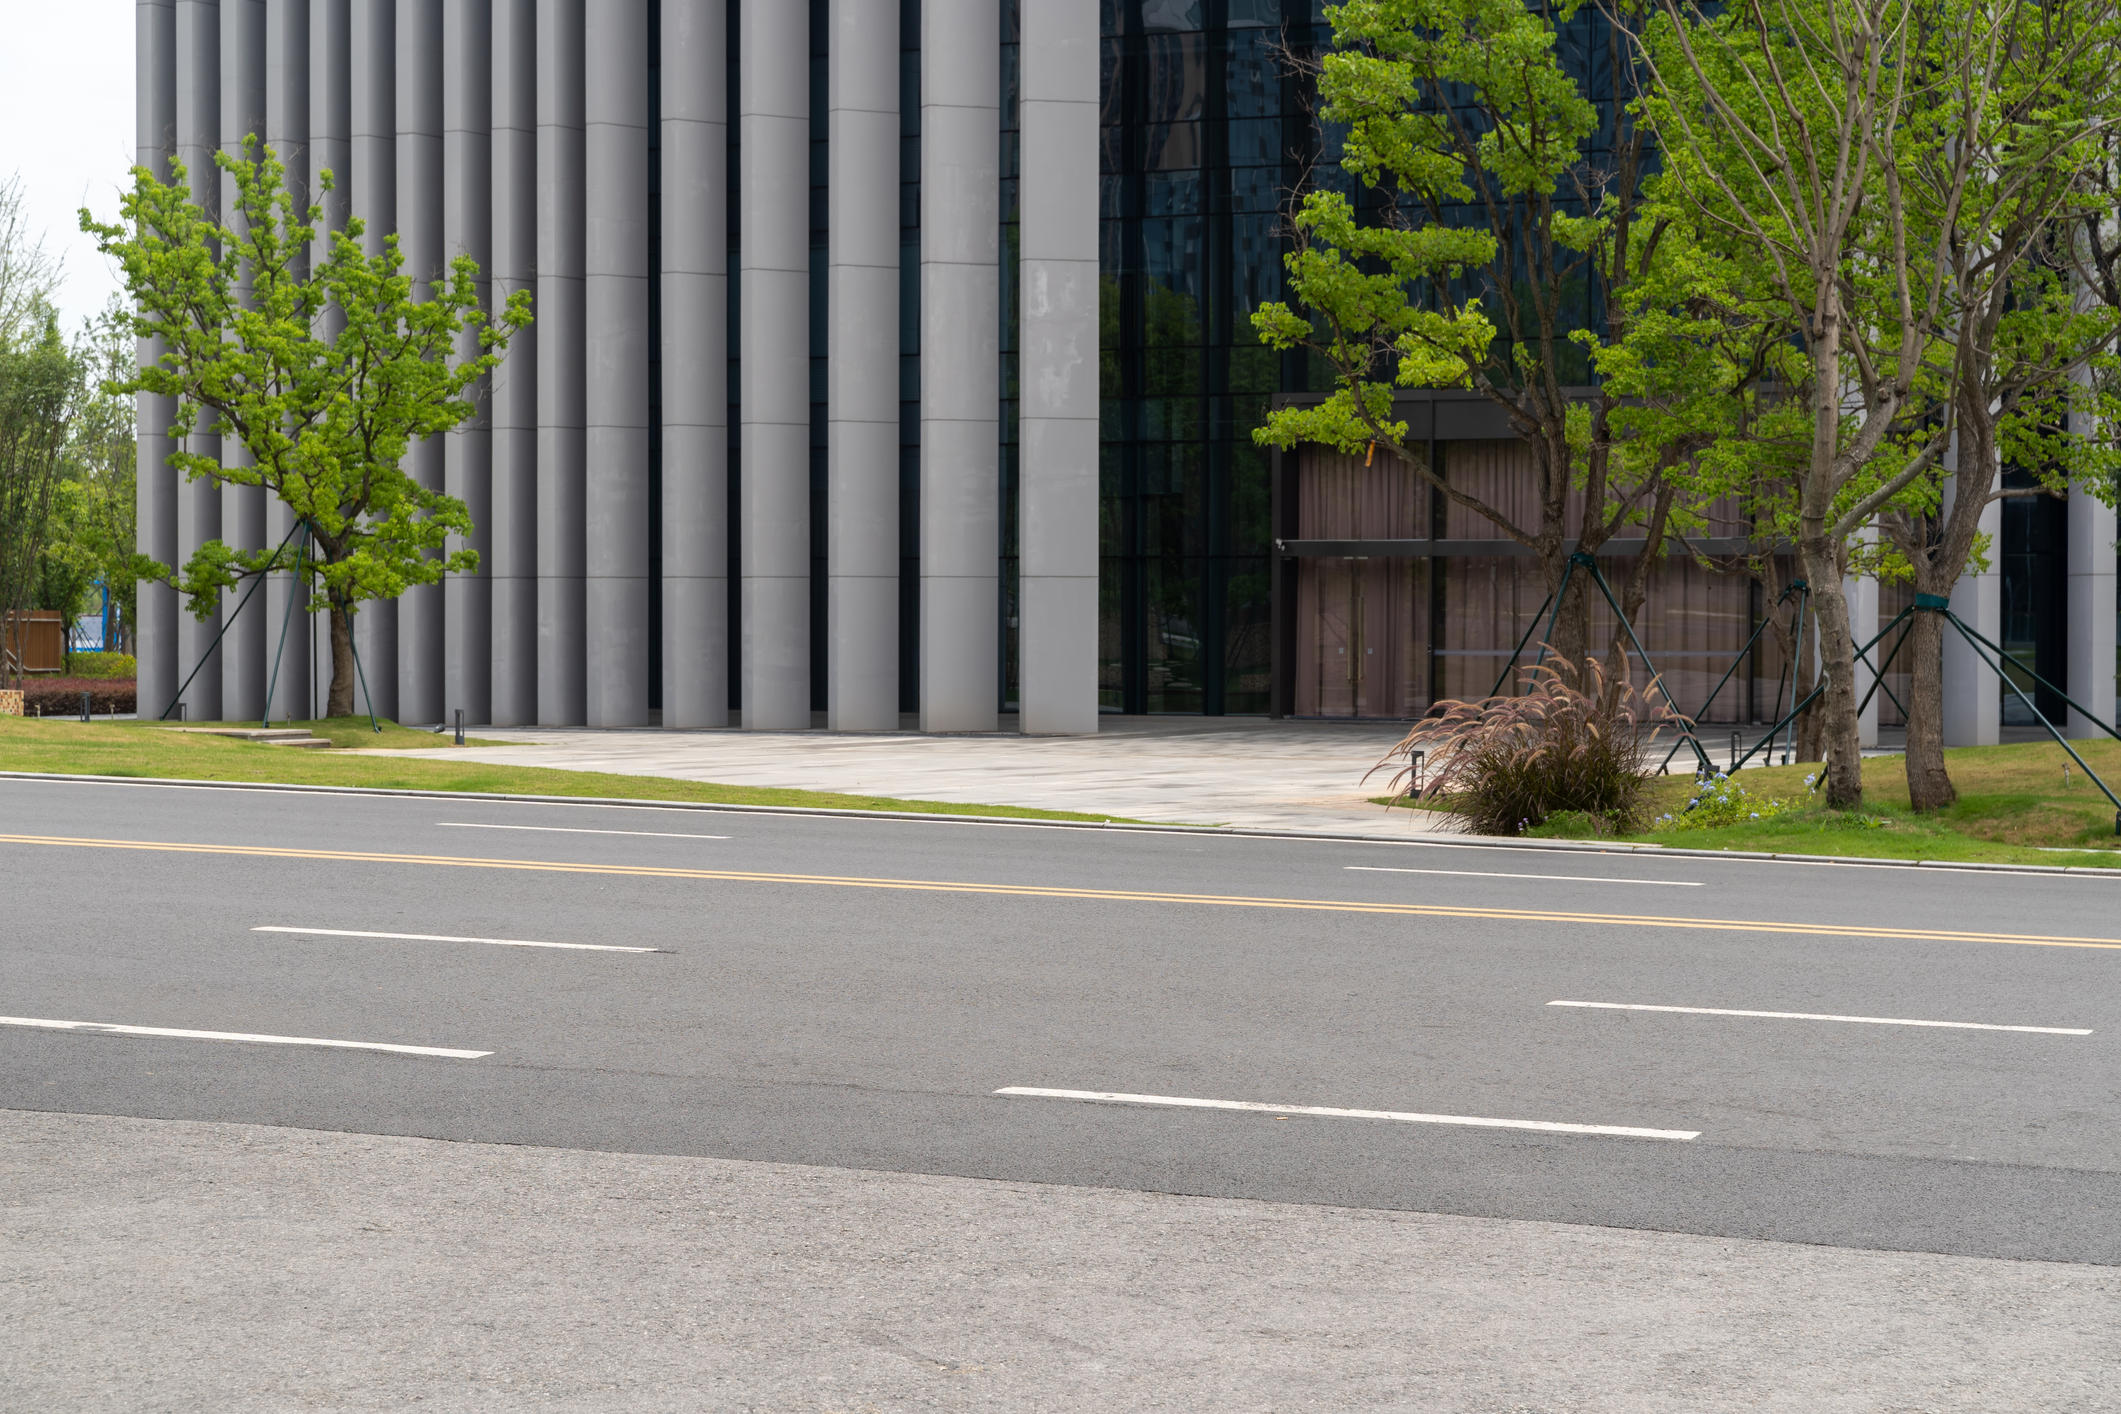 Whether your project involves repairing old asphalt pavement or maintaining newer surfaces, we've got you taken care of. We provide service for commercial paving as well as residential paving needs.